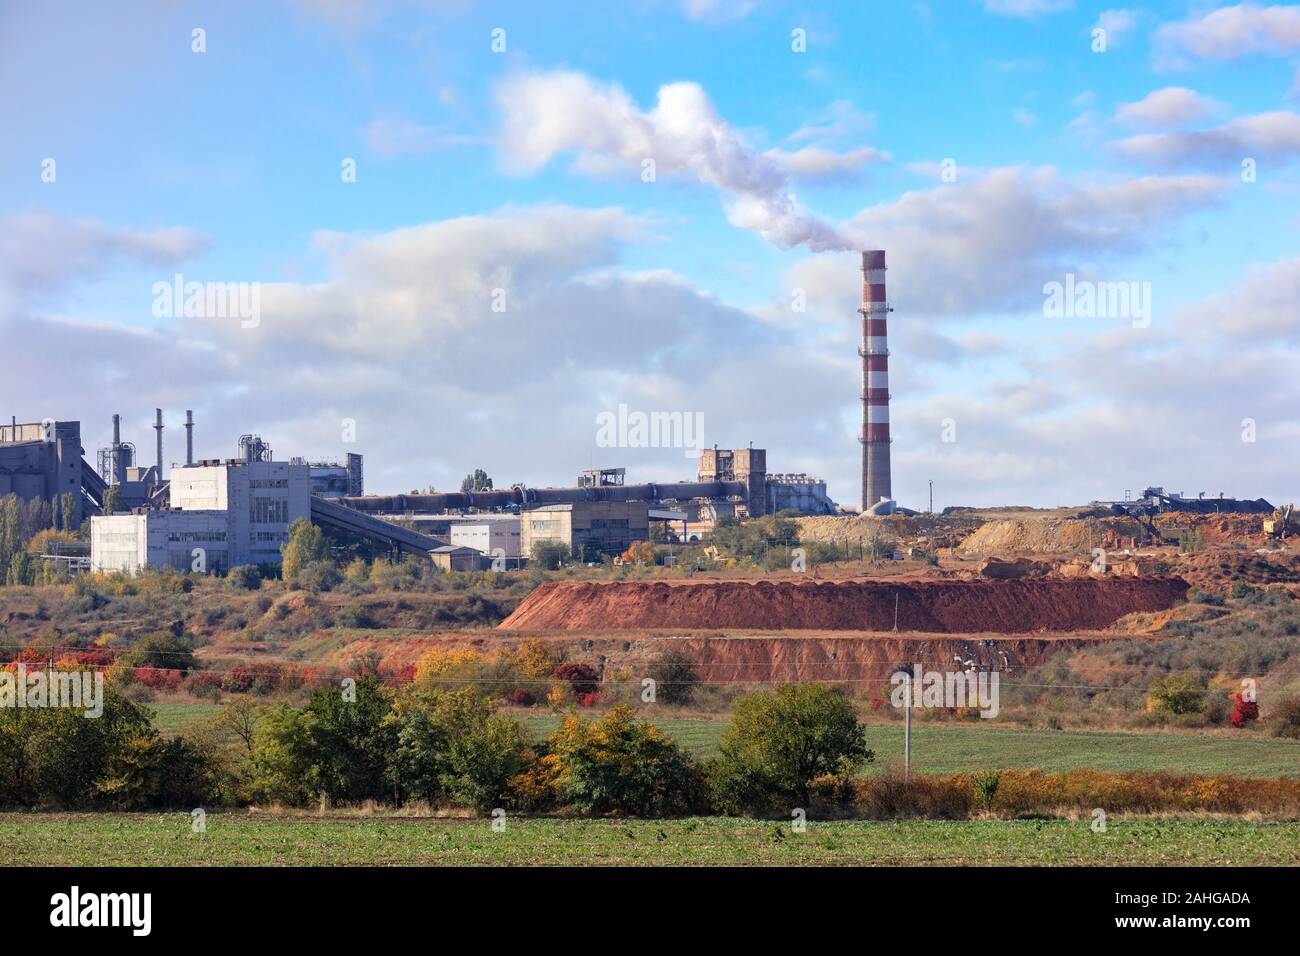 The pipe of the cement plant rises above the quarry of clay and limestone against the background of a slightly cloudy blue summer sky. Stock Photo